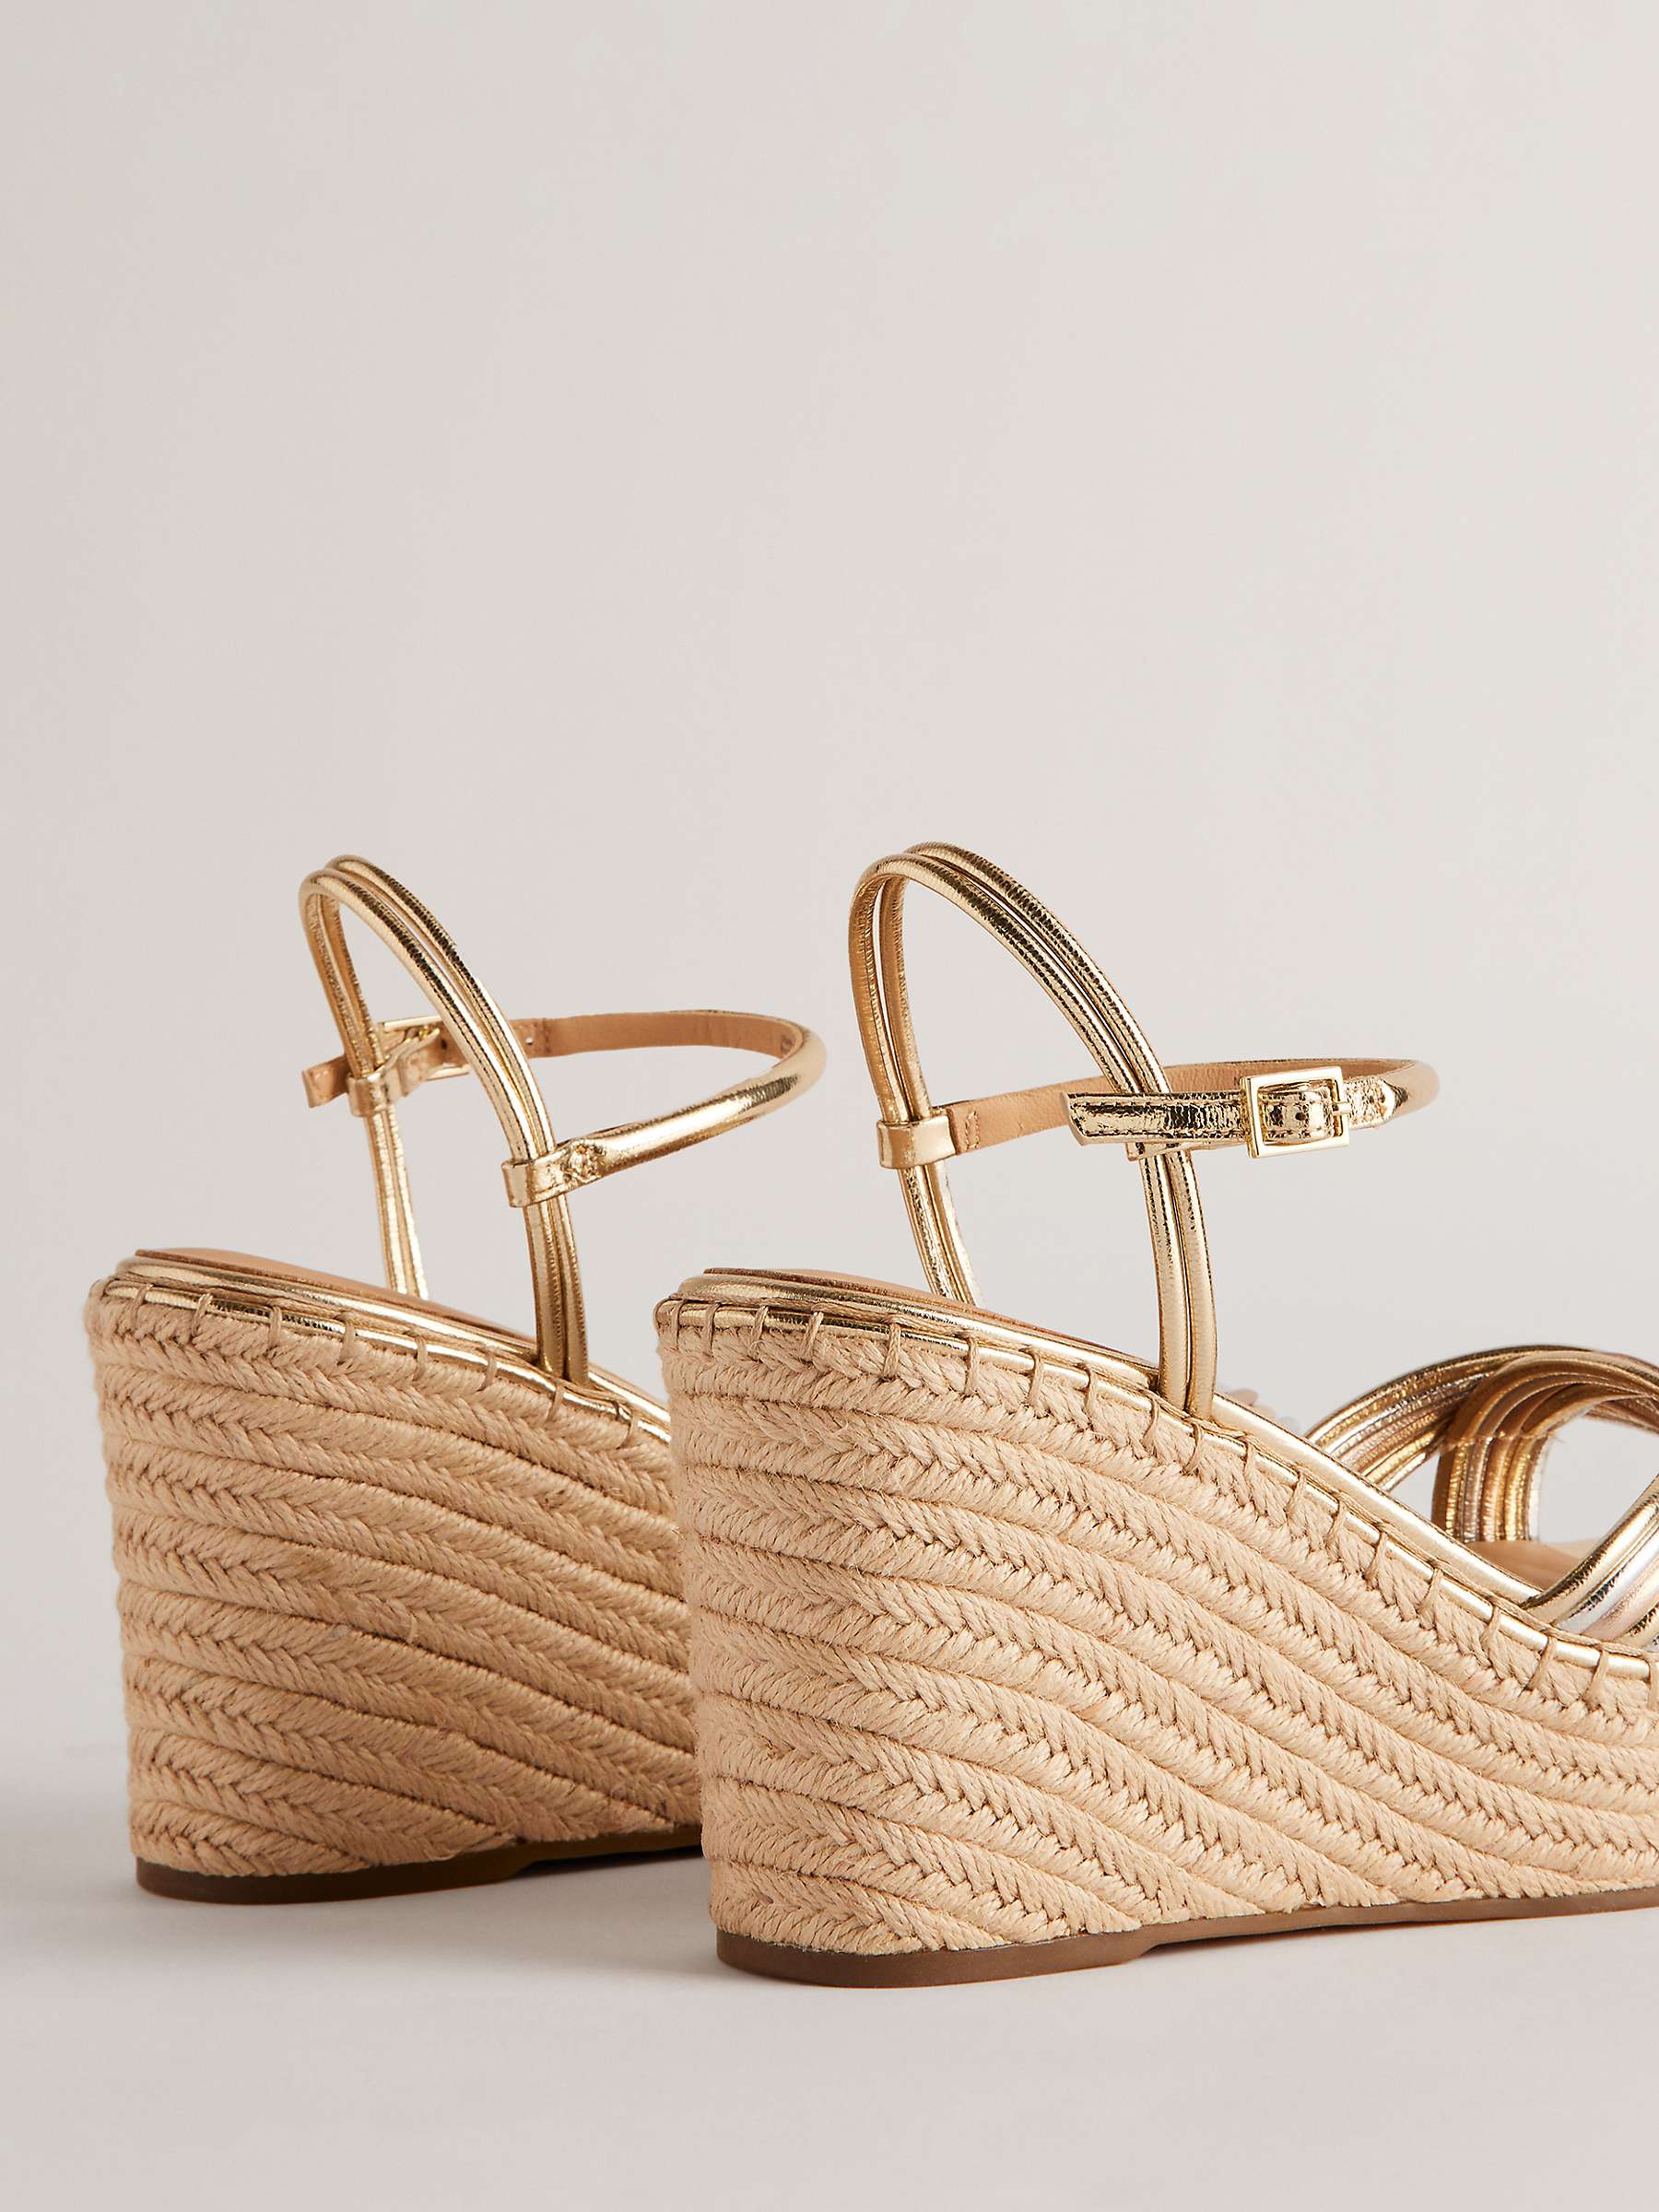 Buy Ted Baker Amaalia Cross Strap Leather Wedge Sandals, Rose Gold/Silver Online at johnlewis.com